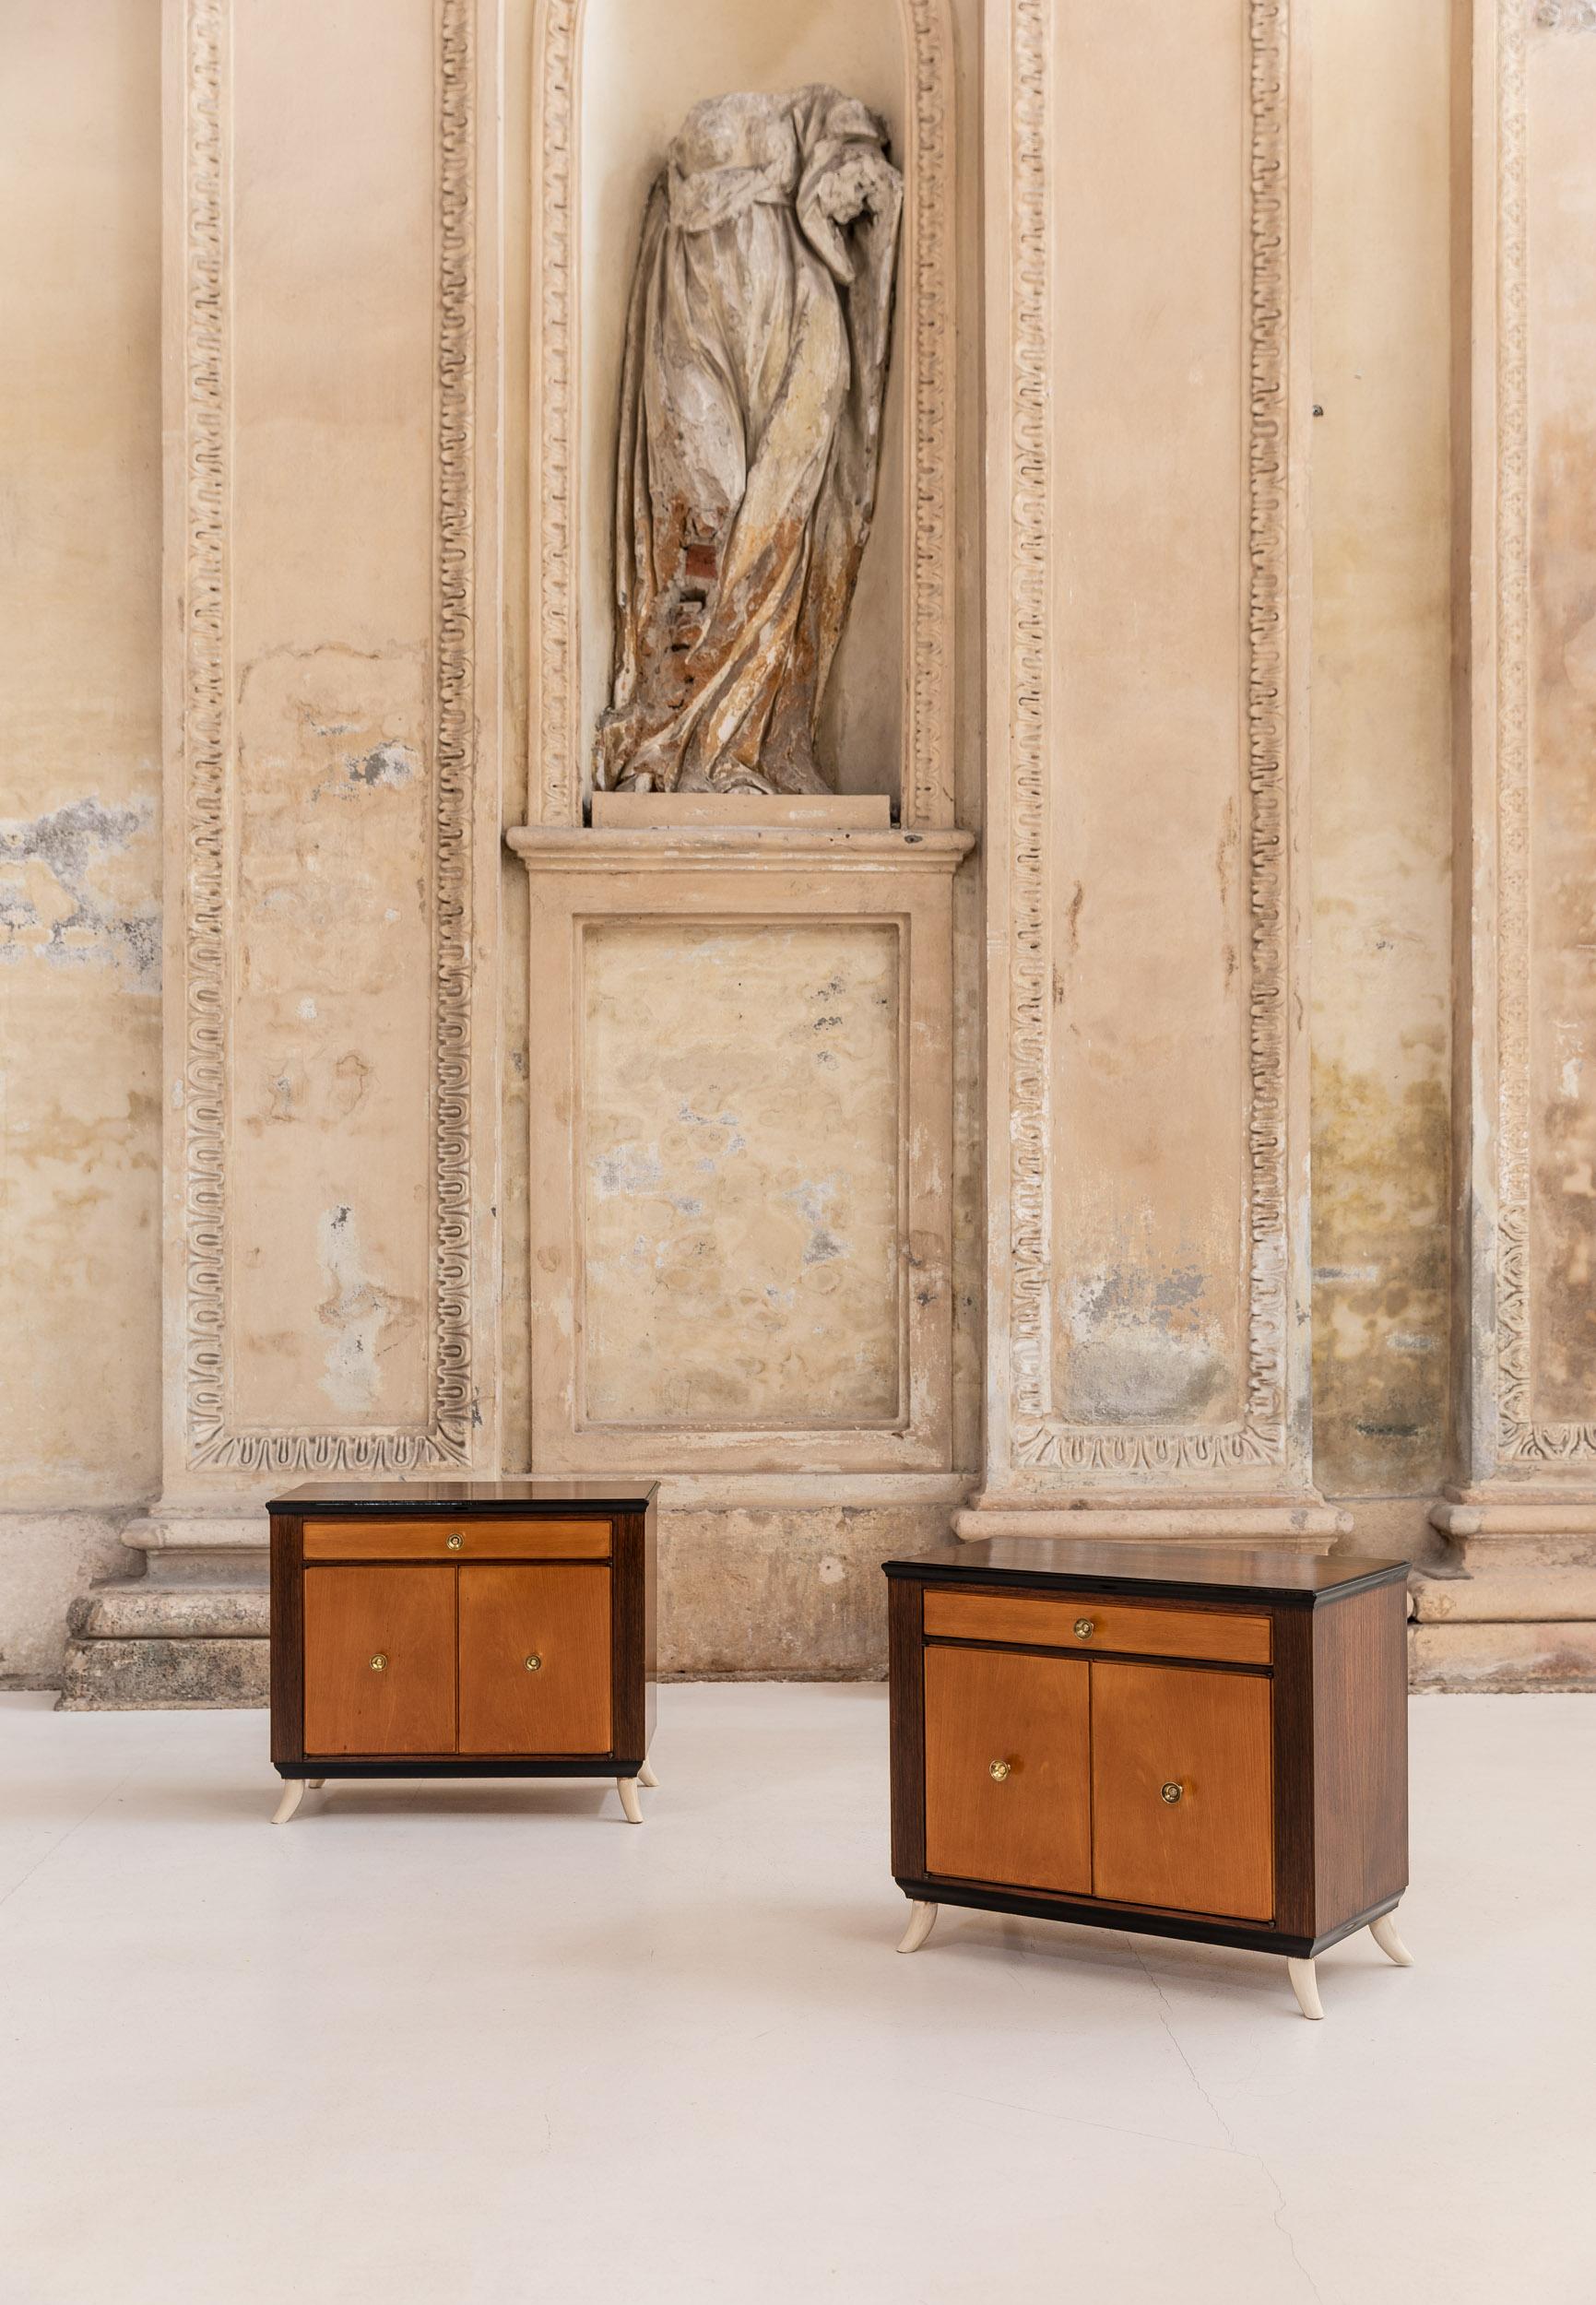 Elegant pair of italian midcentury bedside tables attributed to Guglielmo Ulrich.
Stunning shaped legs, bicolor wood and elegant brass hardware.

Perfect vintage condition.